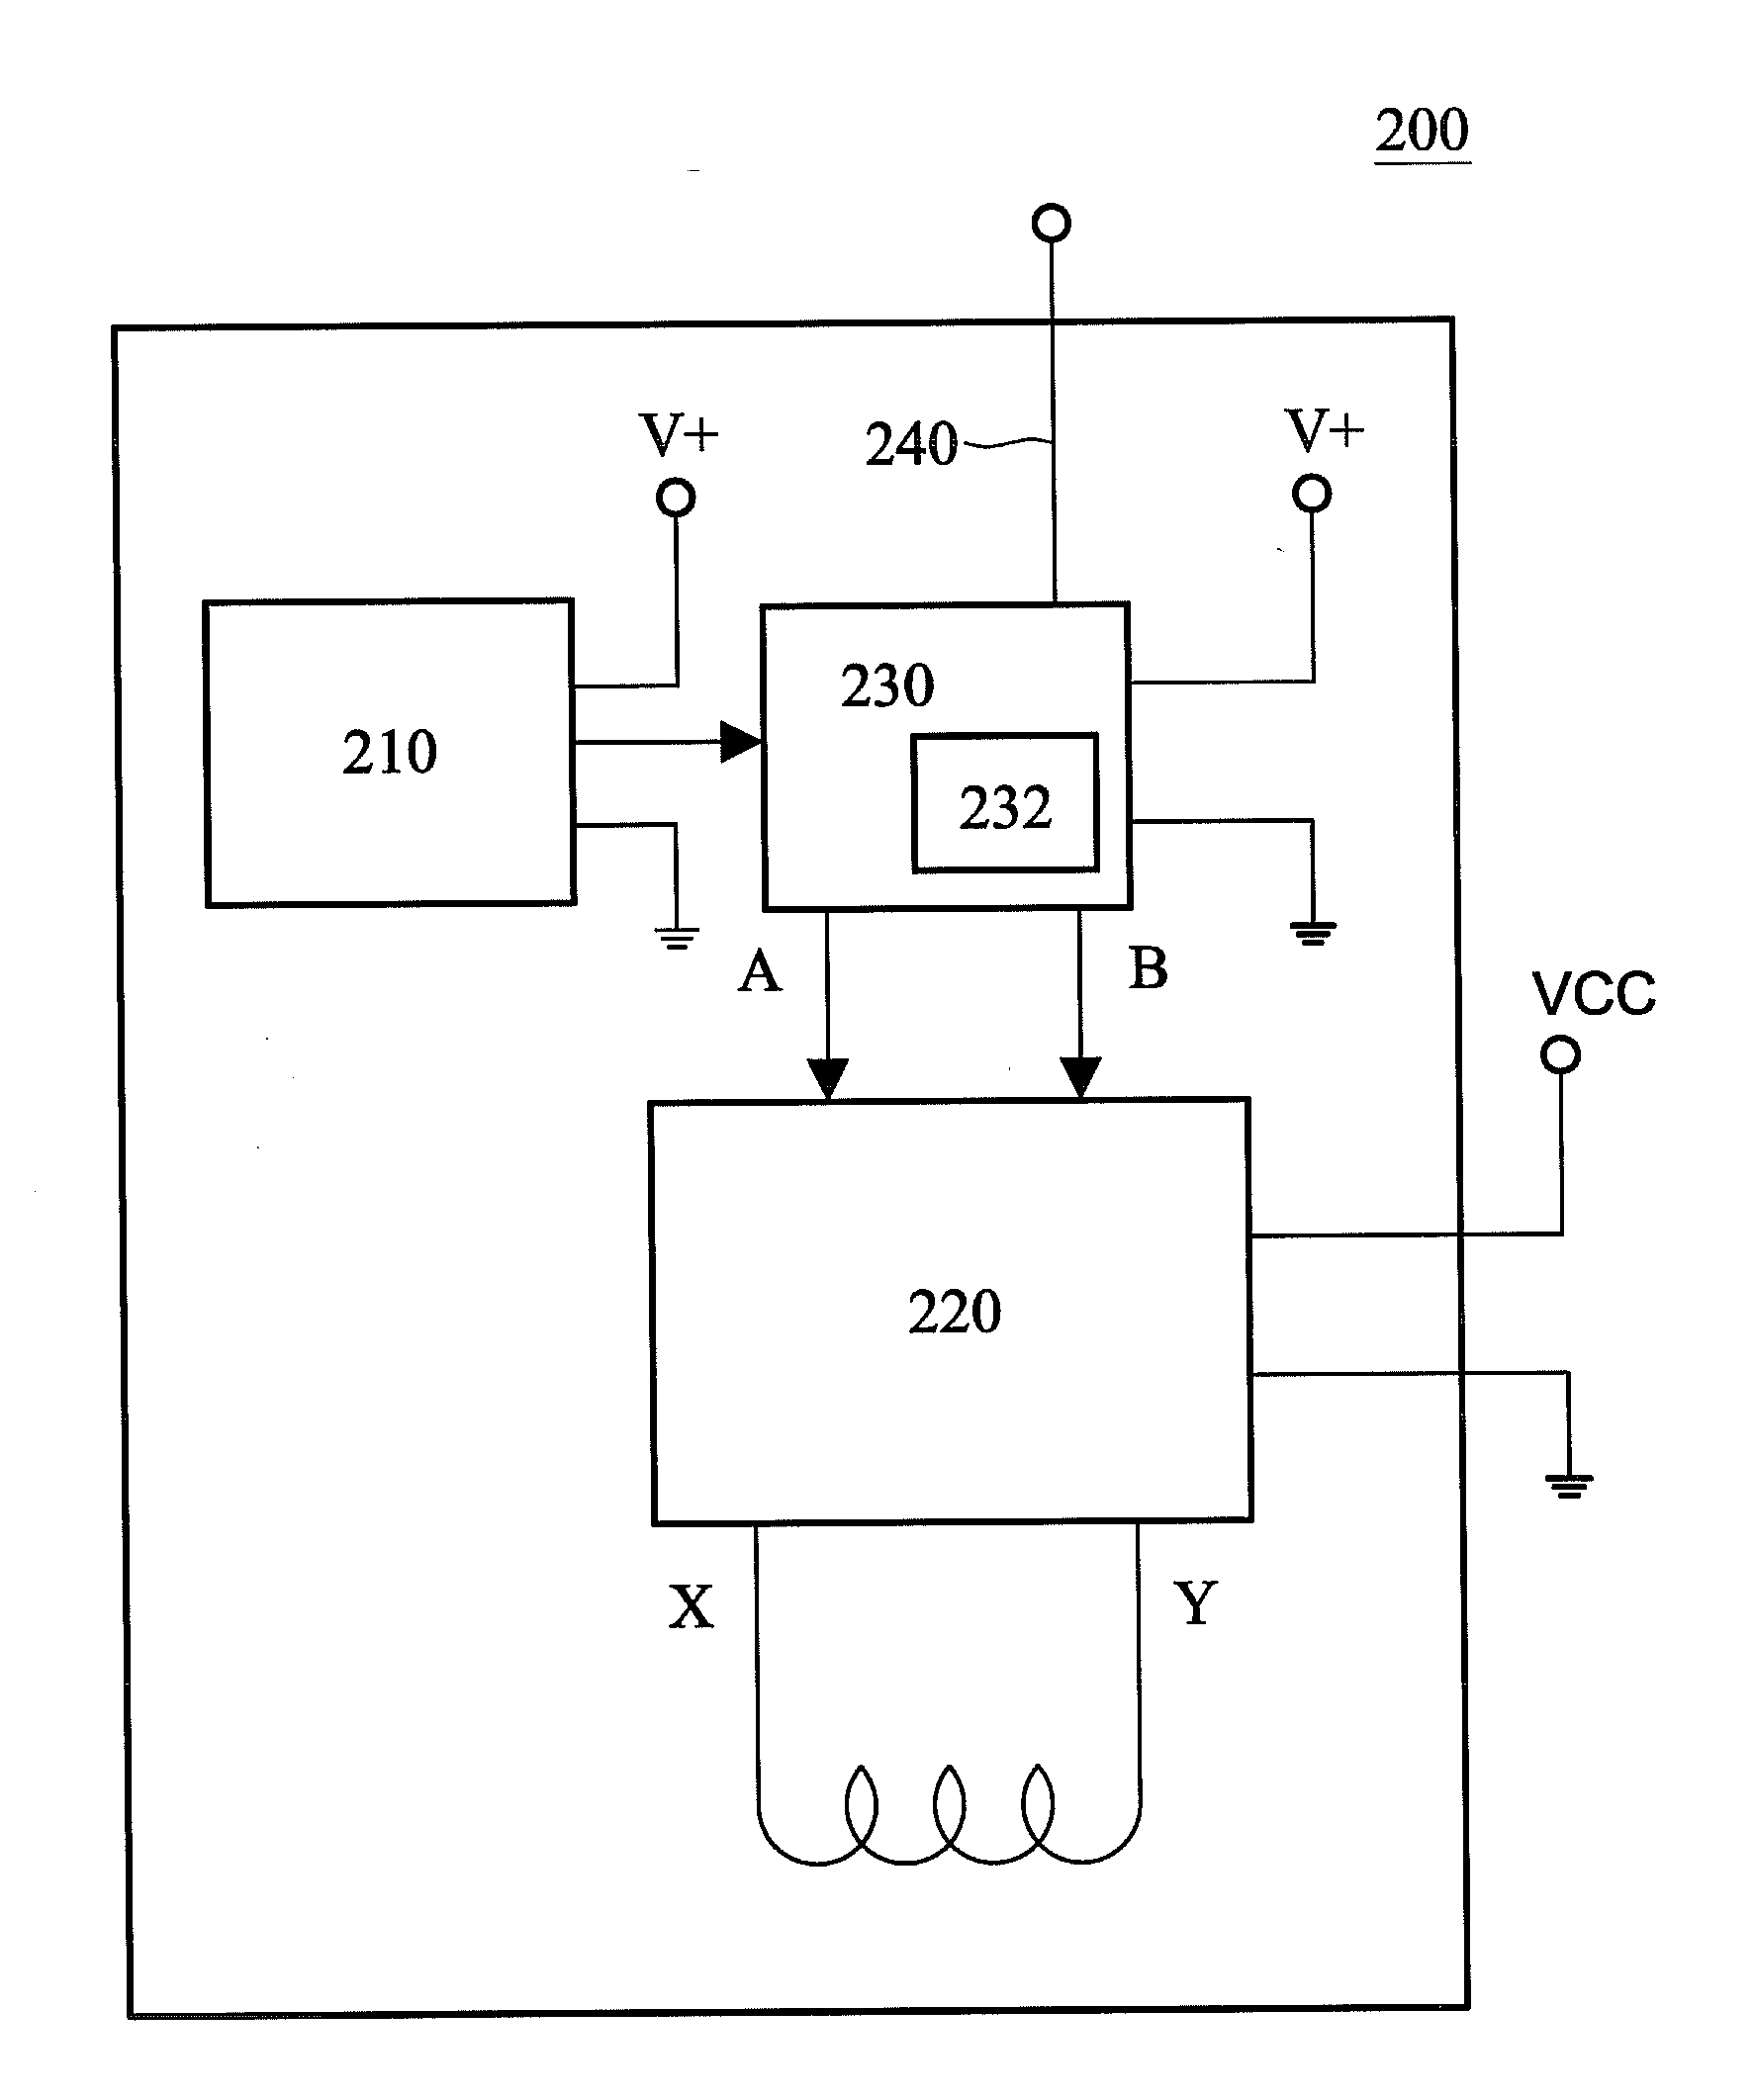 Single phase DC brushless motor controller and method for controlling rotation speed and direction of single phase DC brushless motor